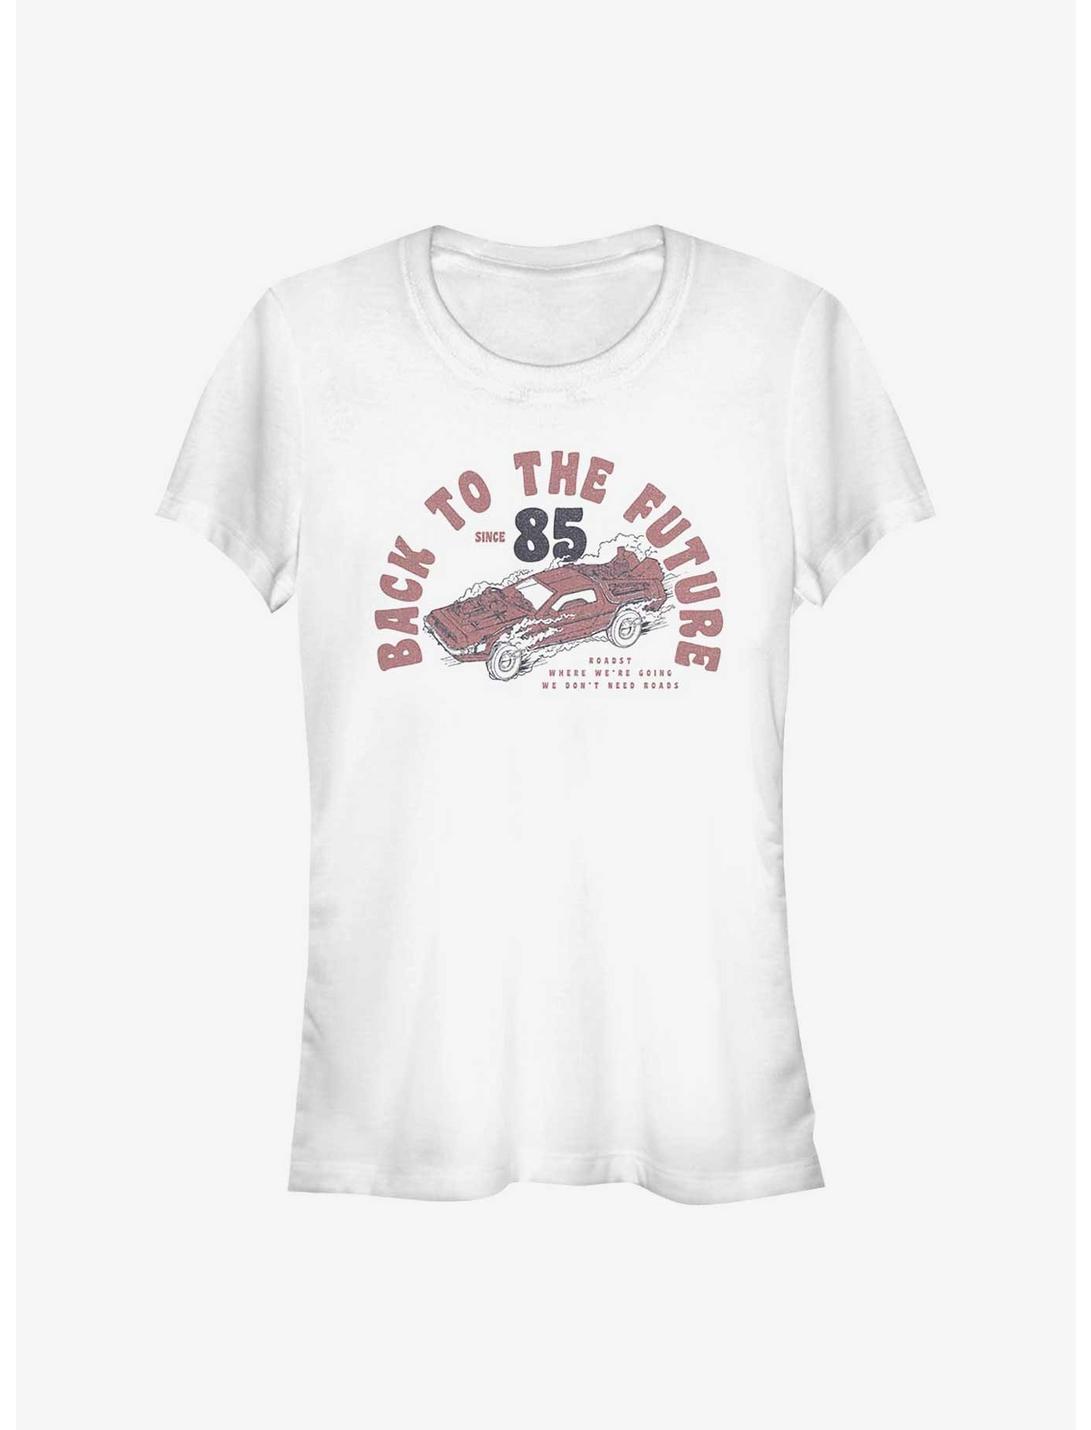 Back To The Future Vintage Logo Since 85 Girls T-Shirt, WHITE, hi-res